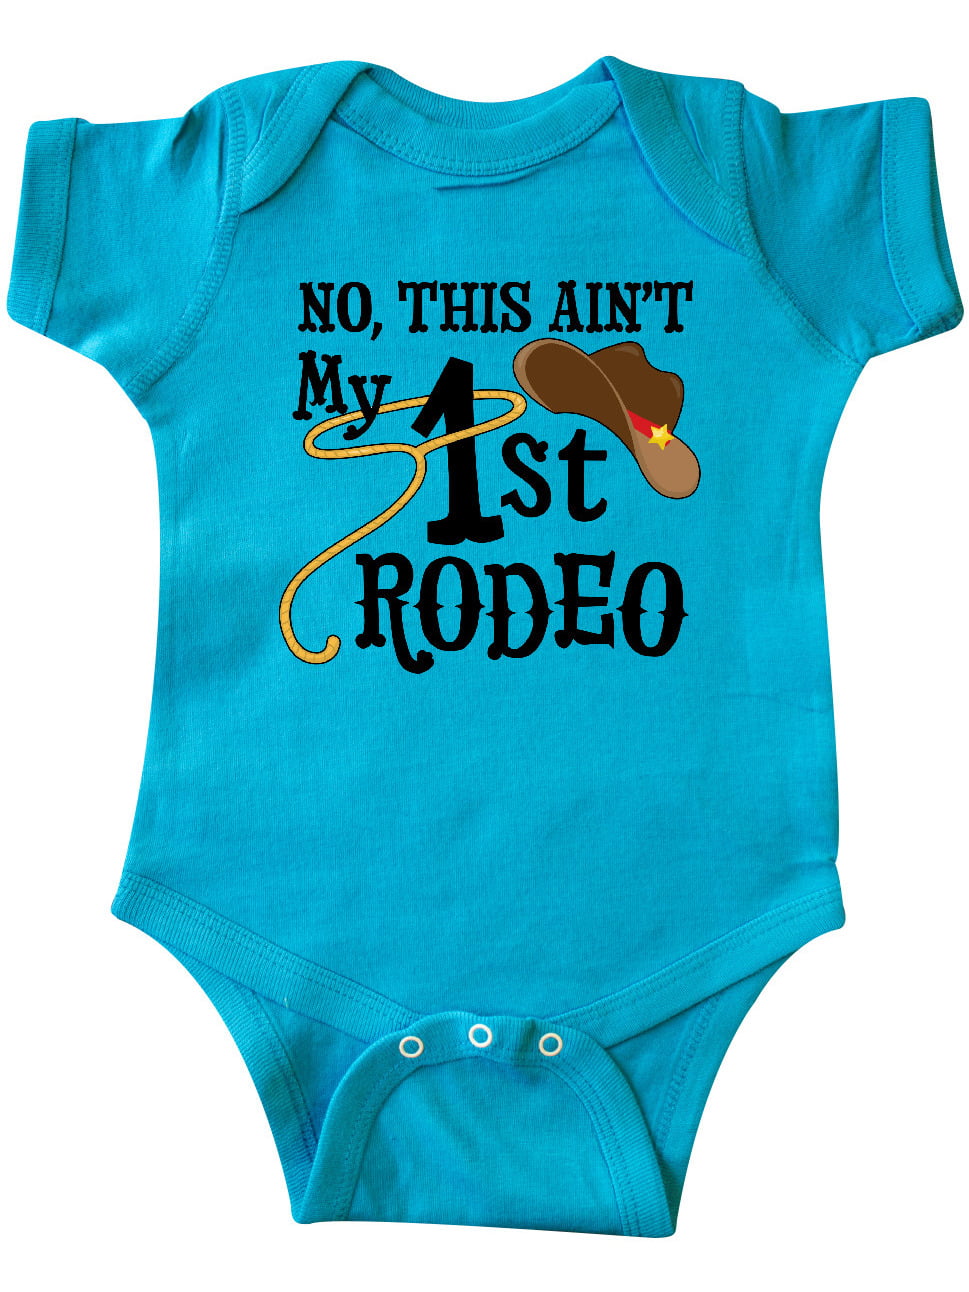 This Is My First Rodeo Bodysuit Cowboy Baby Clothes Baby Boy Bodysuit Baby Shower Gift Baby Girl Clothes Cute Baby Clothes